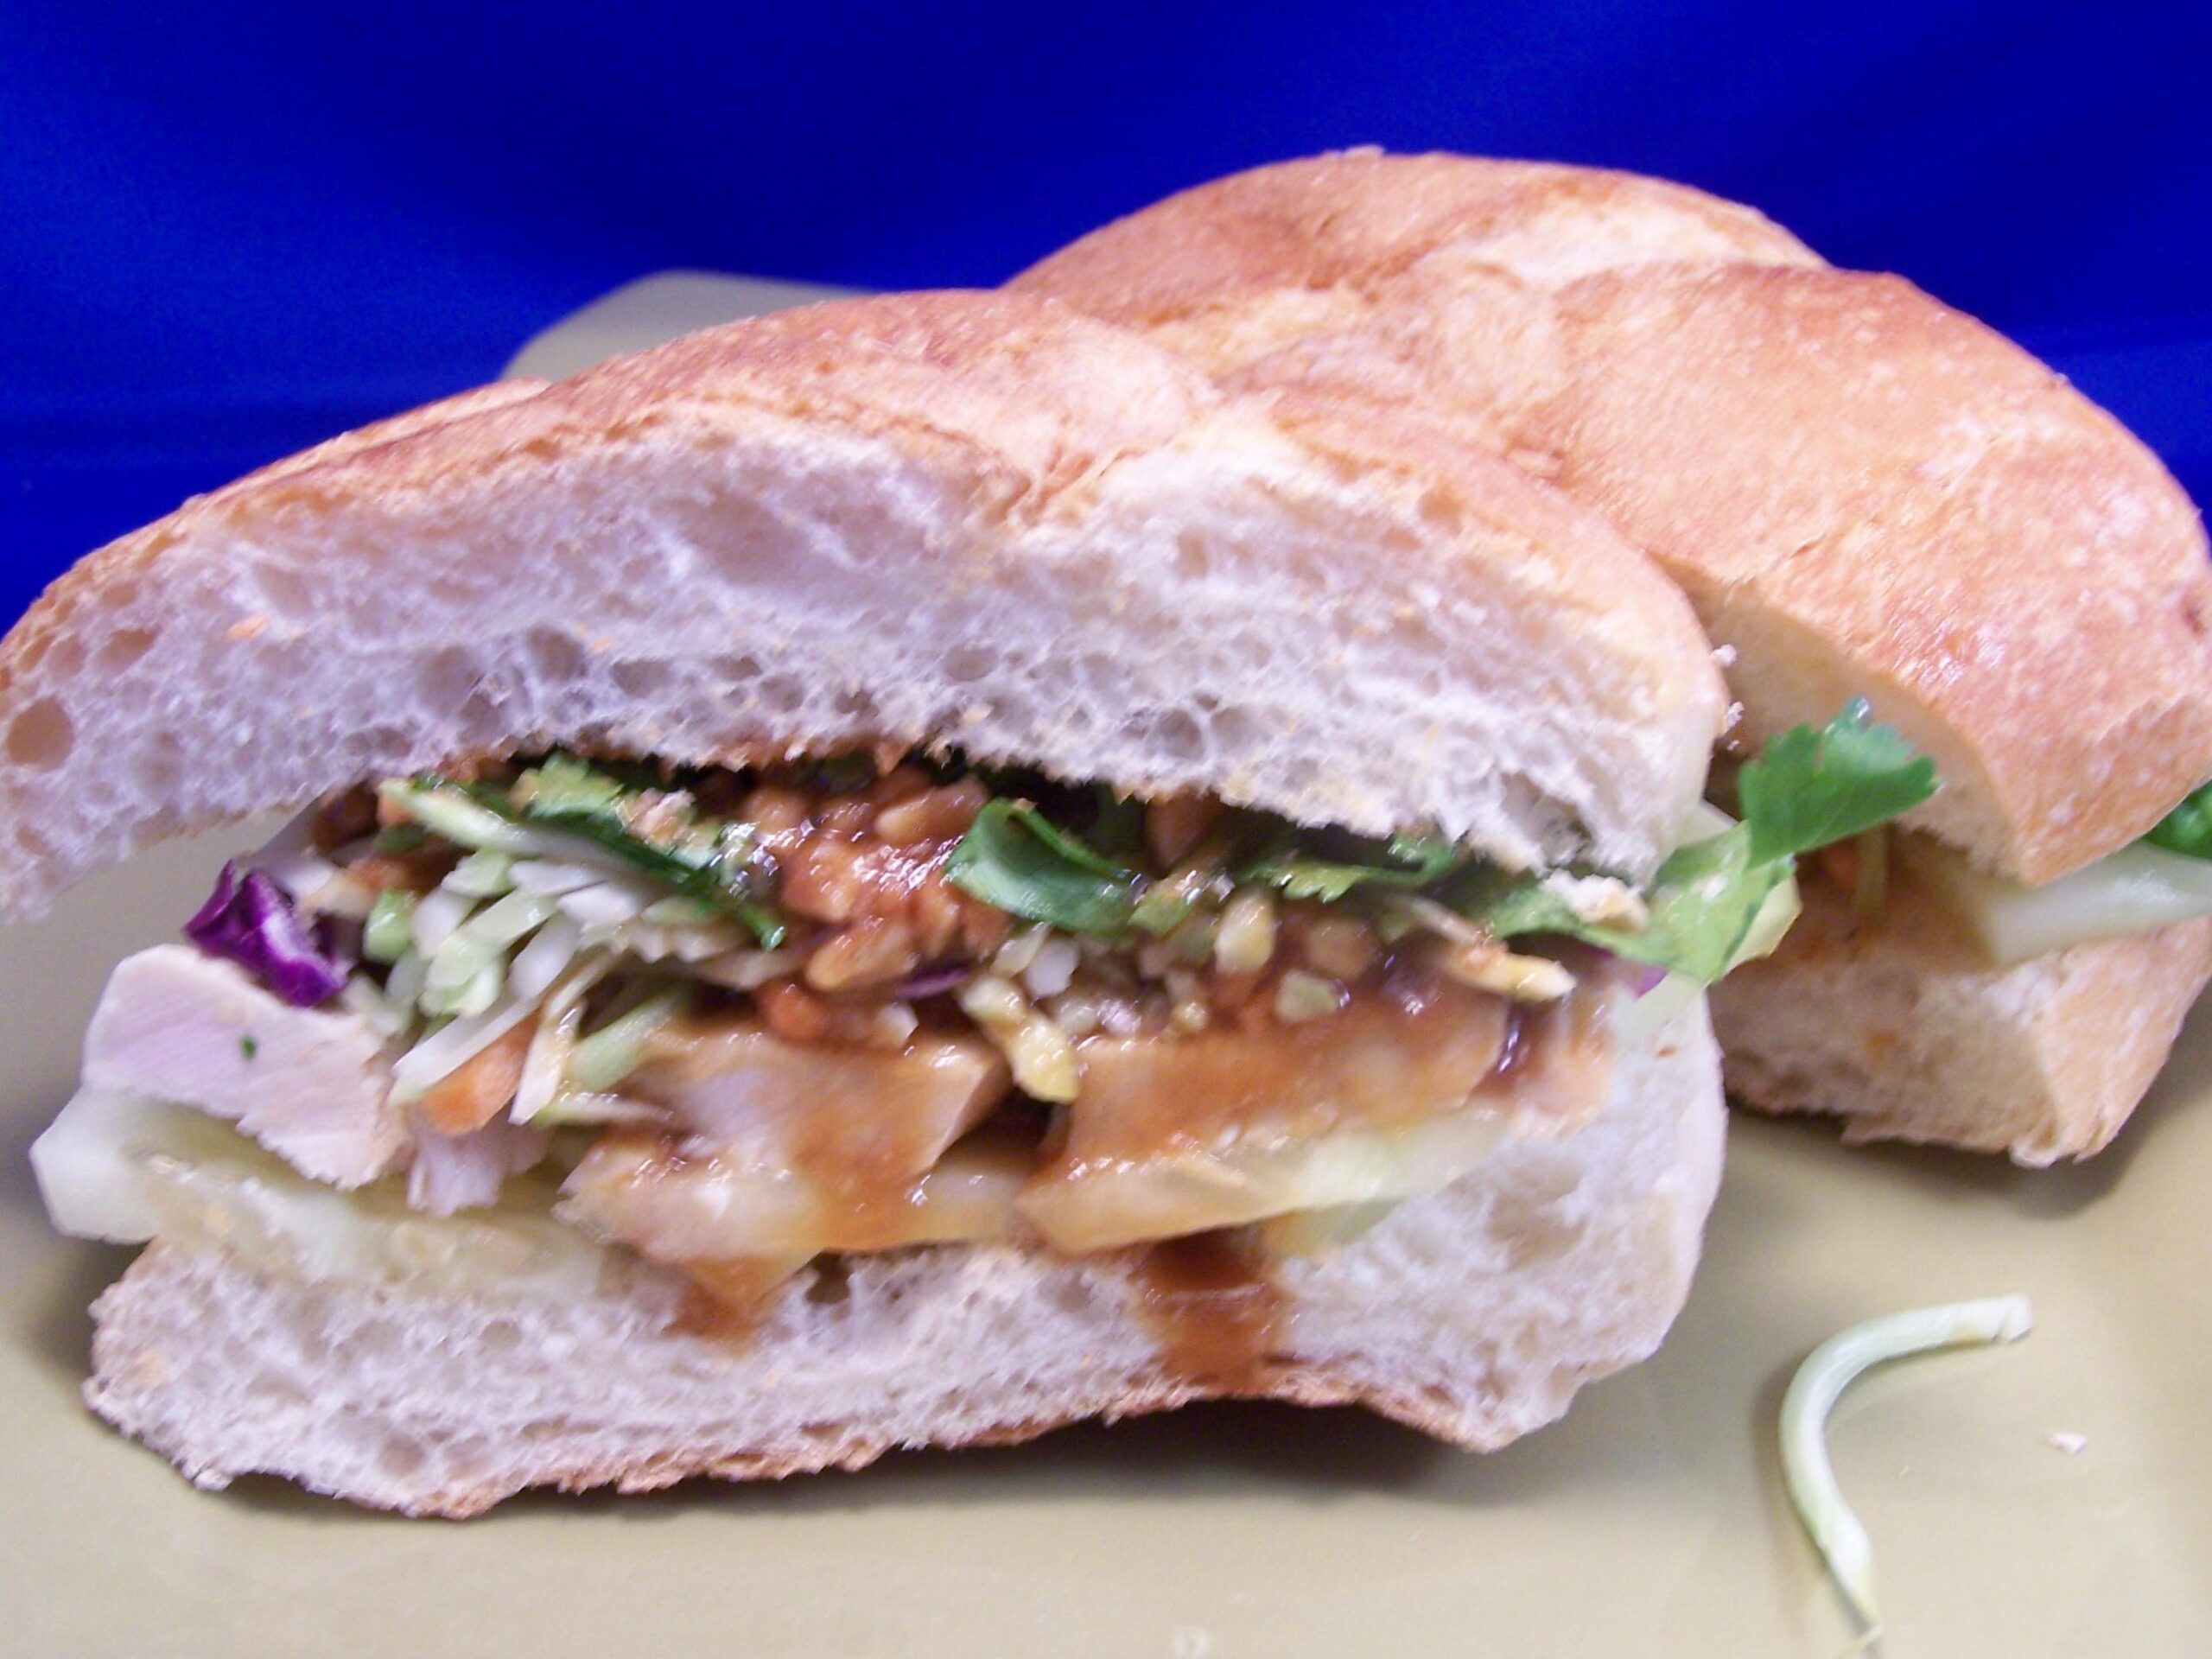  This Banh Mi sandwich is packed with flavor and perfect for lunch or dinner.